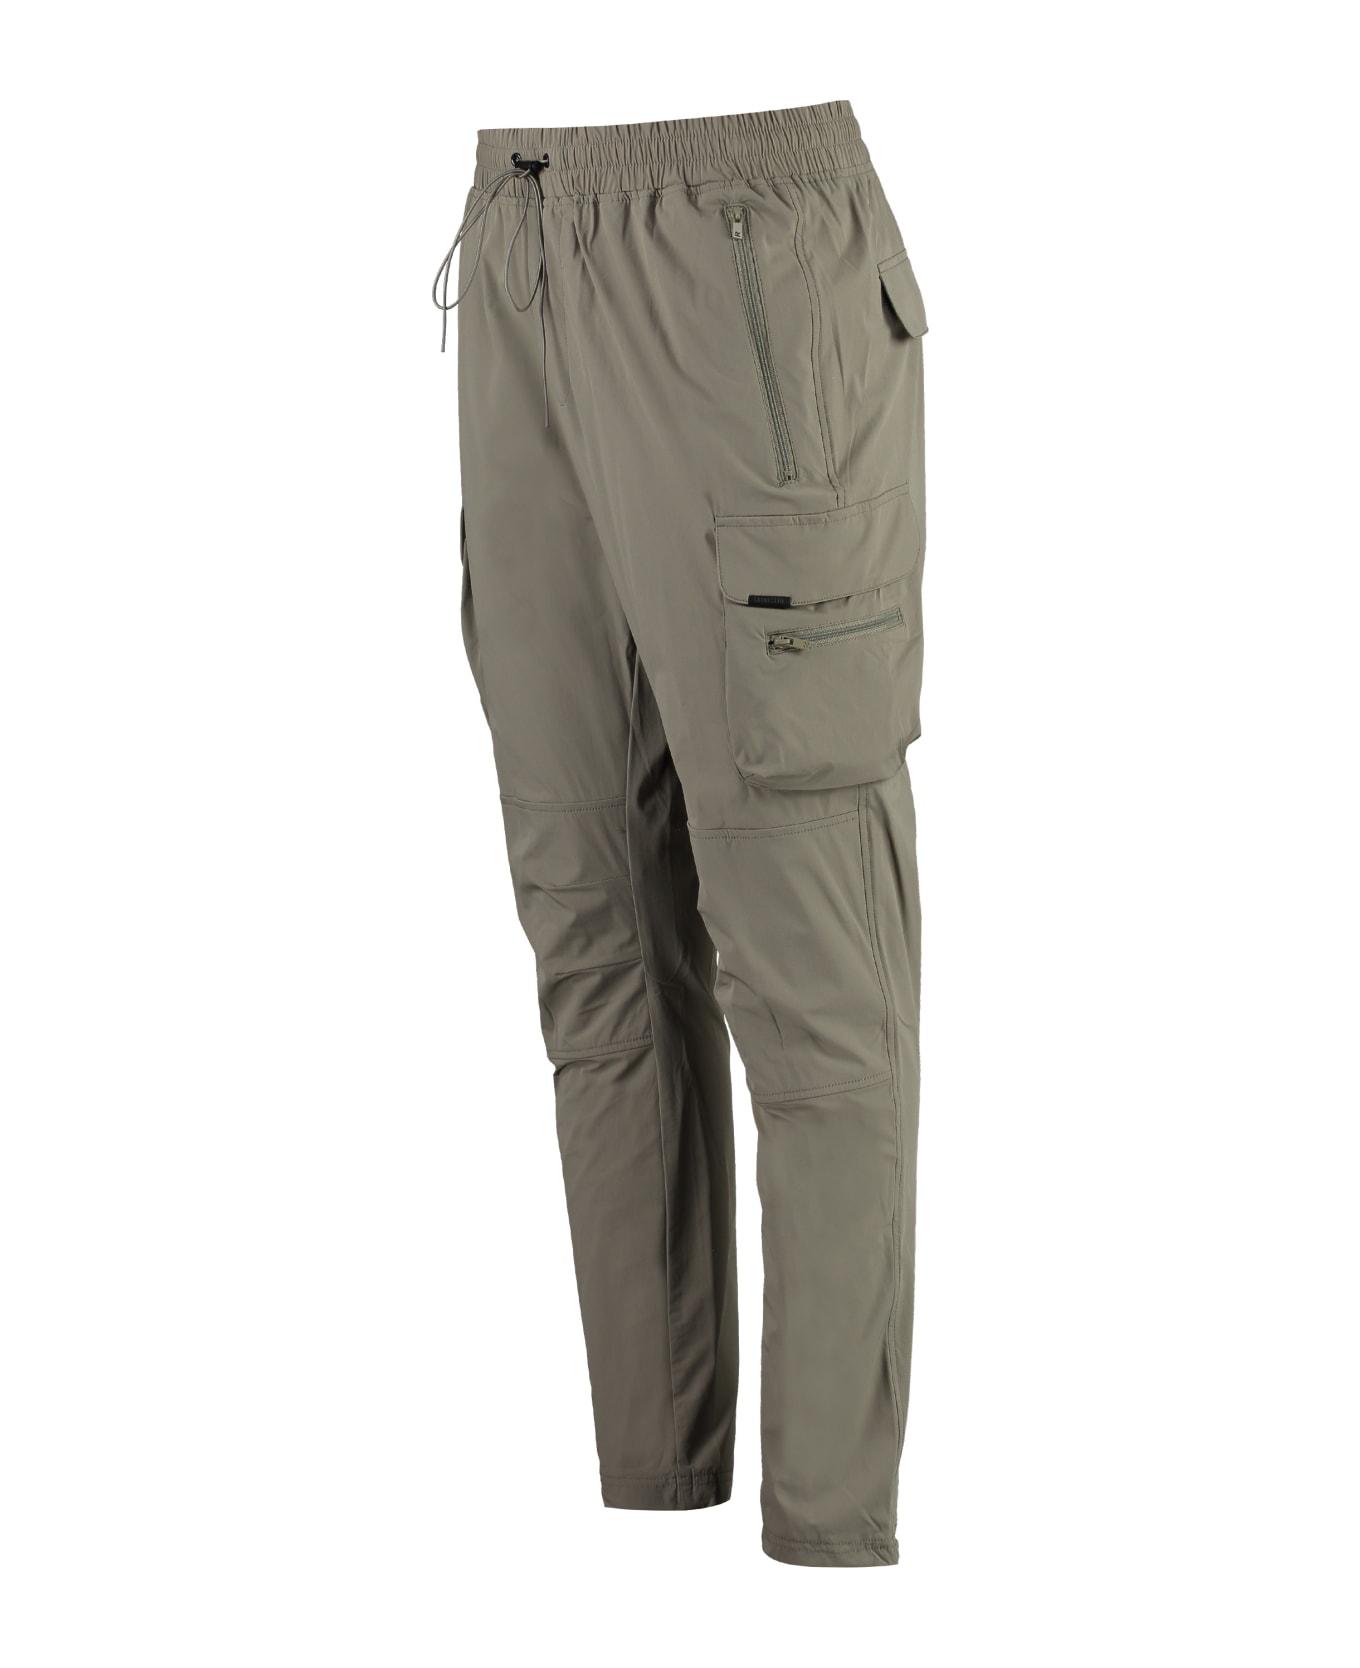 REPRESENT 247 Cargo Trousers - brown ボトムス